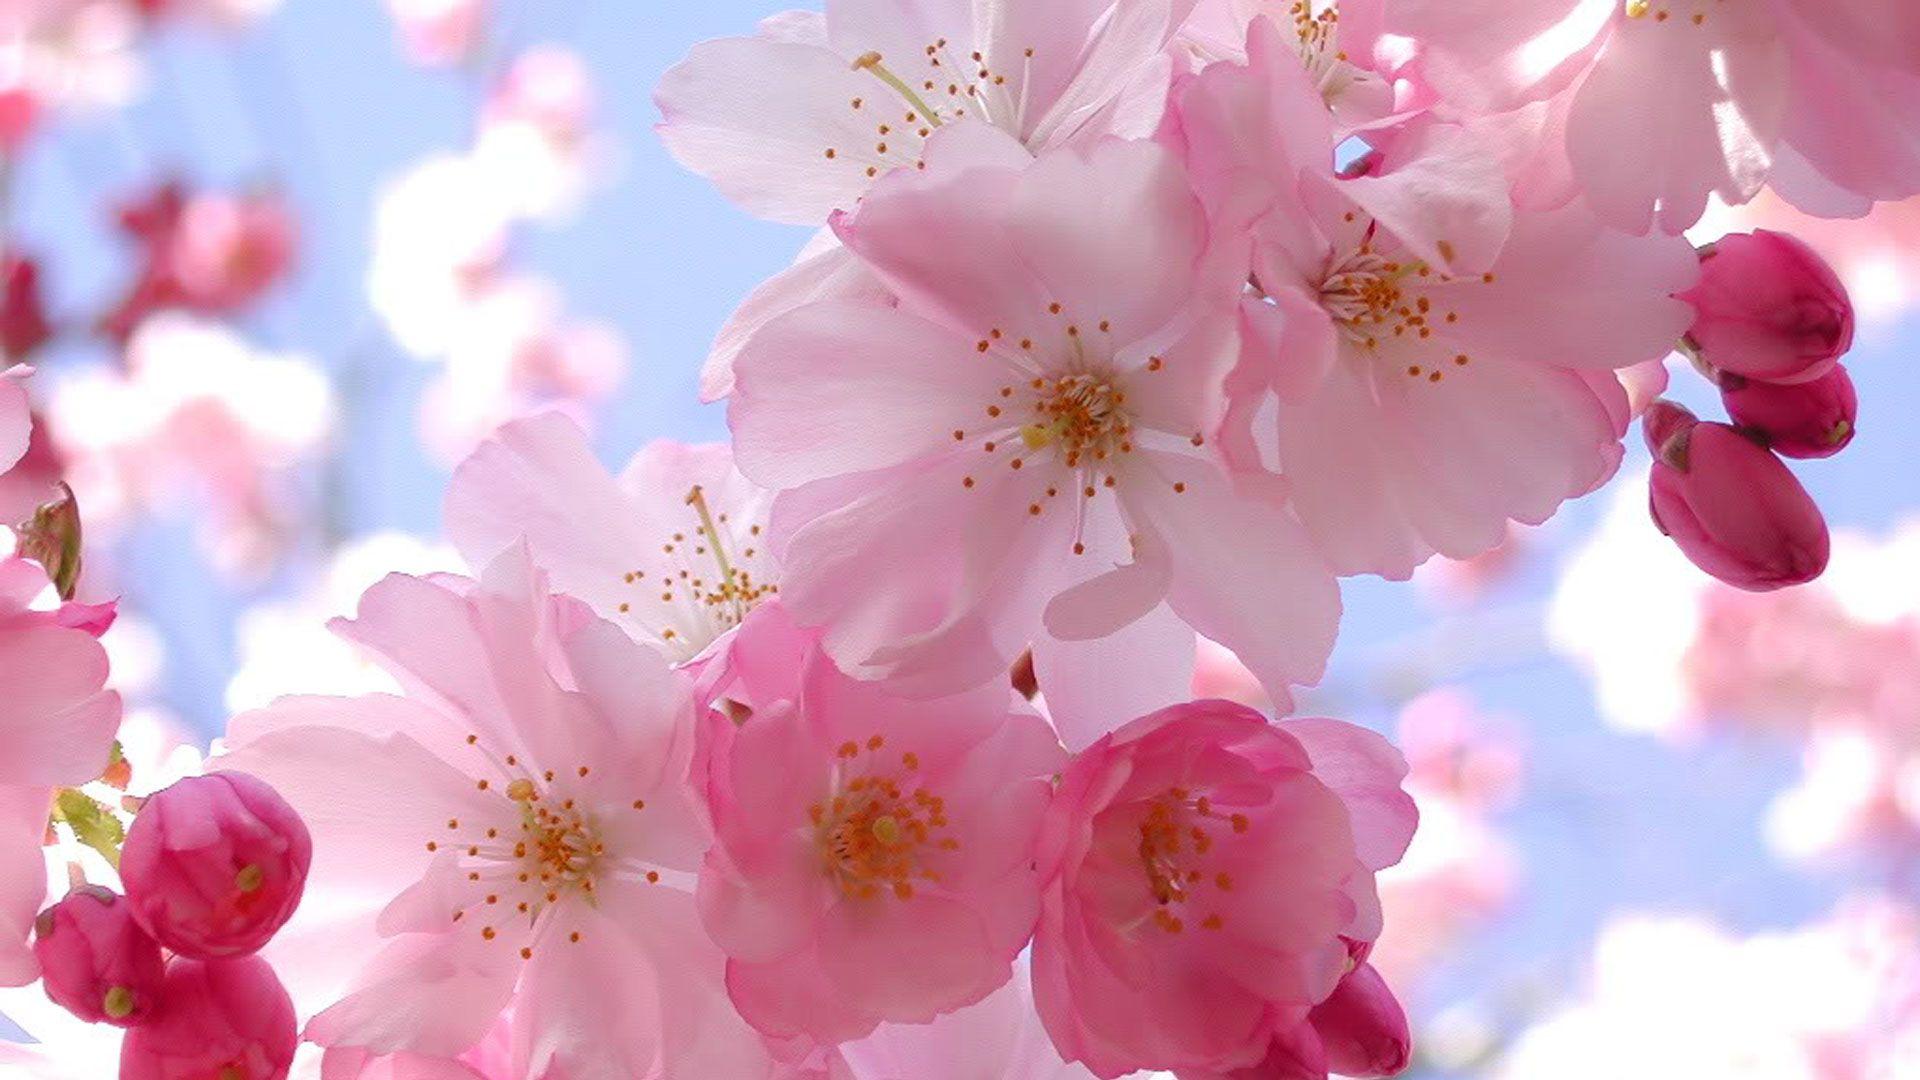 Cherry Blossom Background Images  Free Download on Freepik